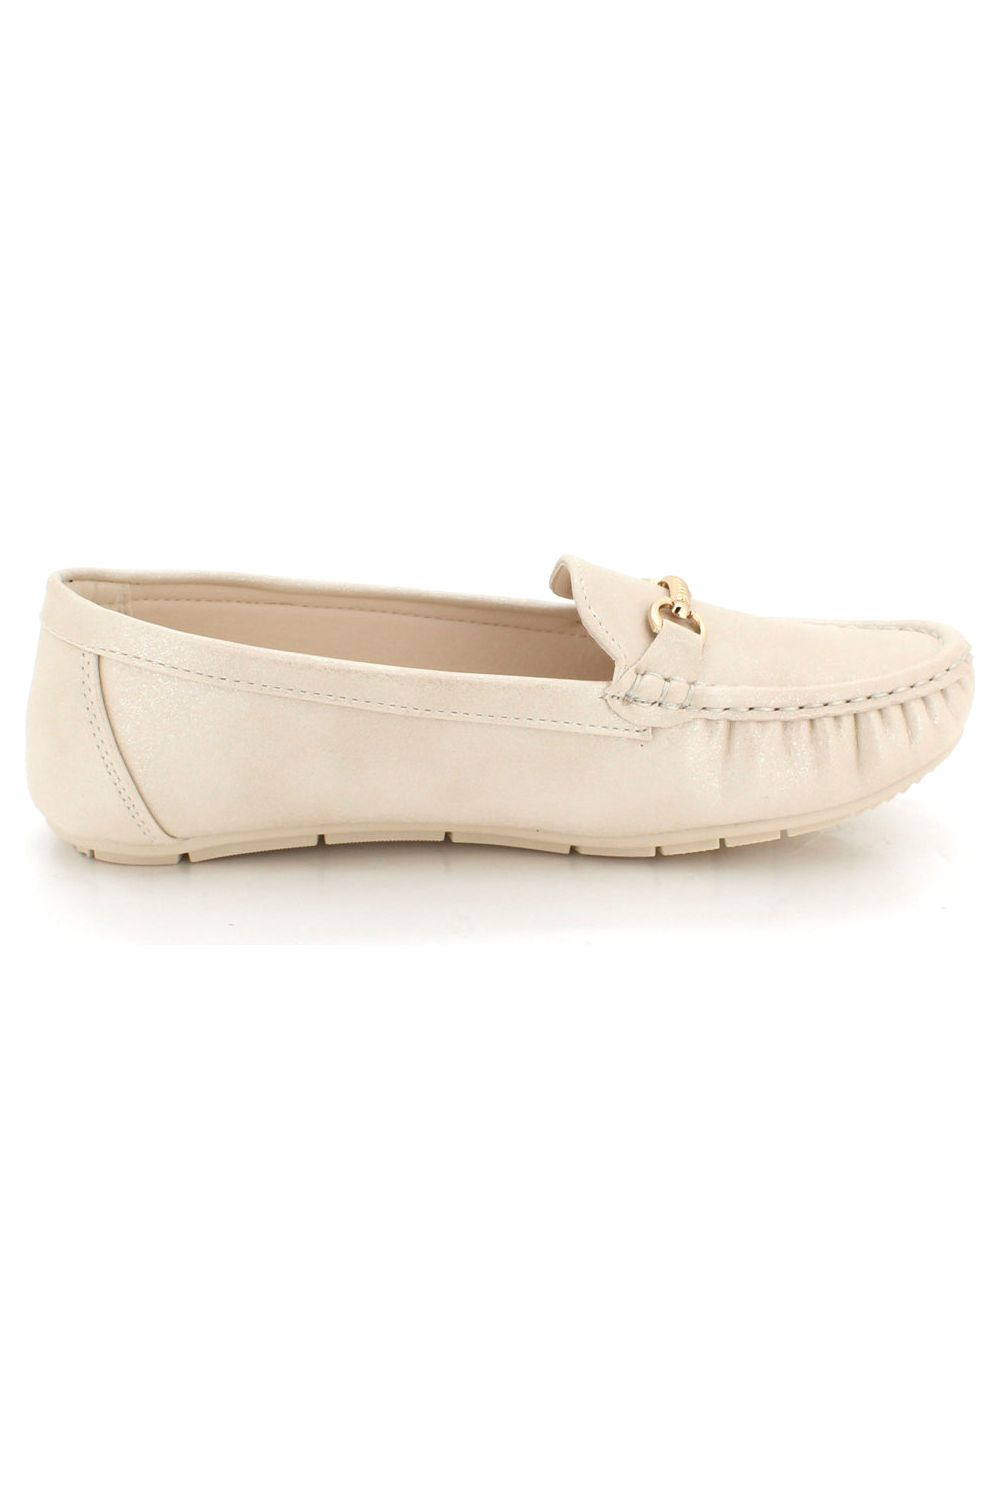 Comfort Casual Everyday Office Work Moccasins Loafer Closed Toe L8085